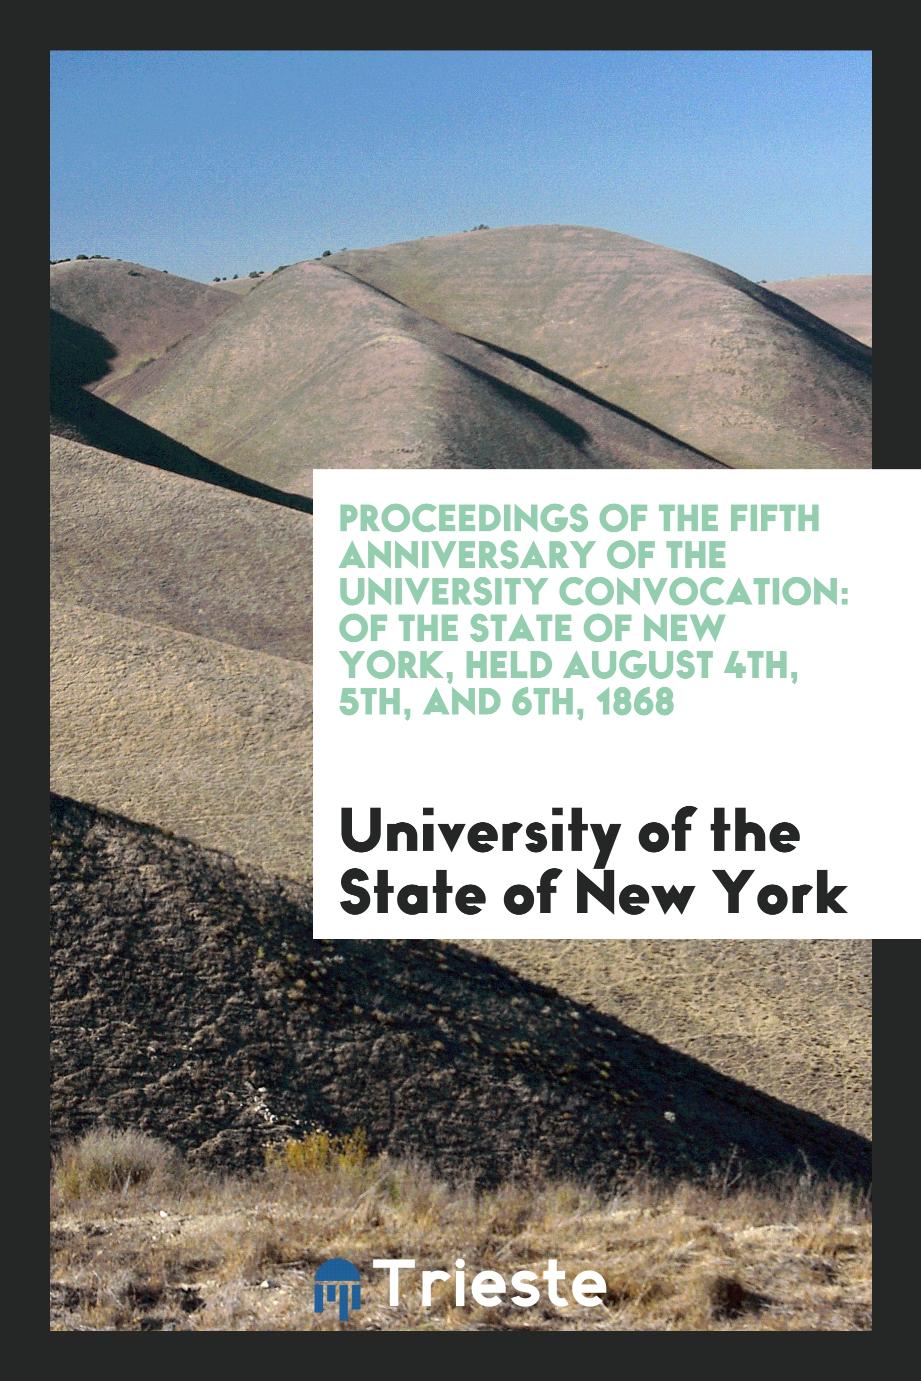 Proceedings of the Fifth Anniversary of the University Convocation: Of the State of New York, Held August 4th, 5th, and 6th, 1868